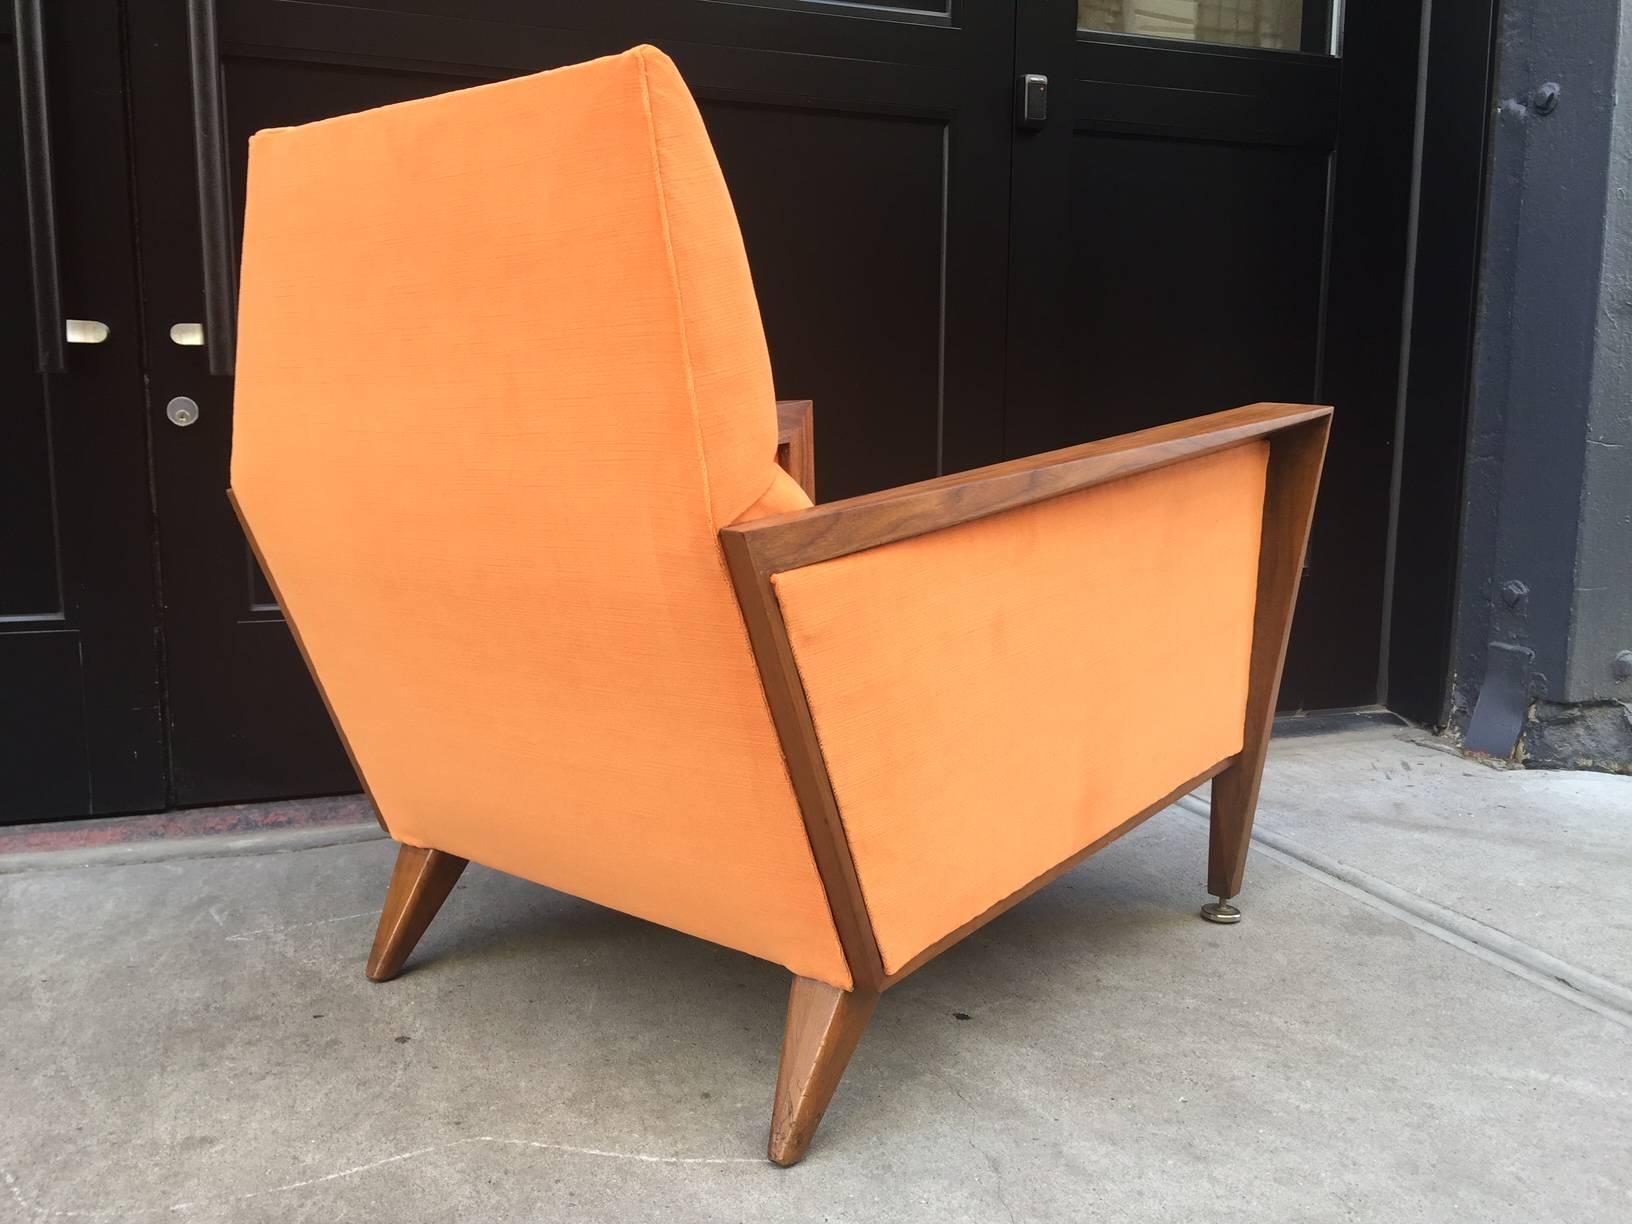 Mid-20th Century Mid-Century Modern Lounge Chair Manner of Jens Risom For Sale